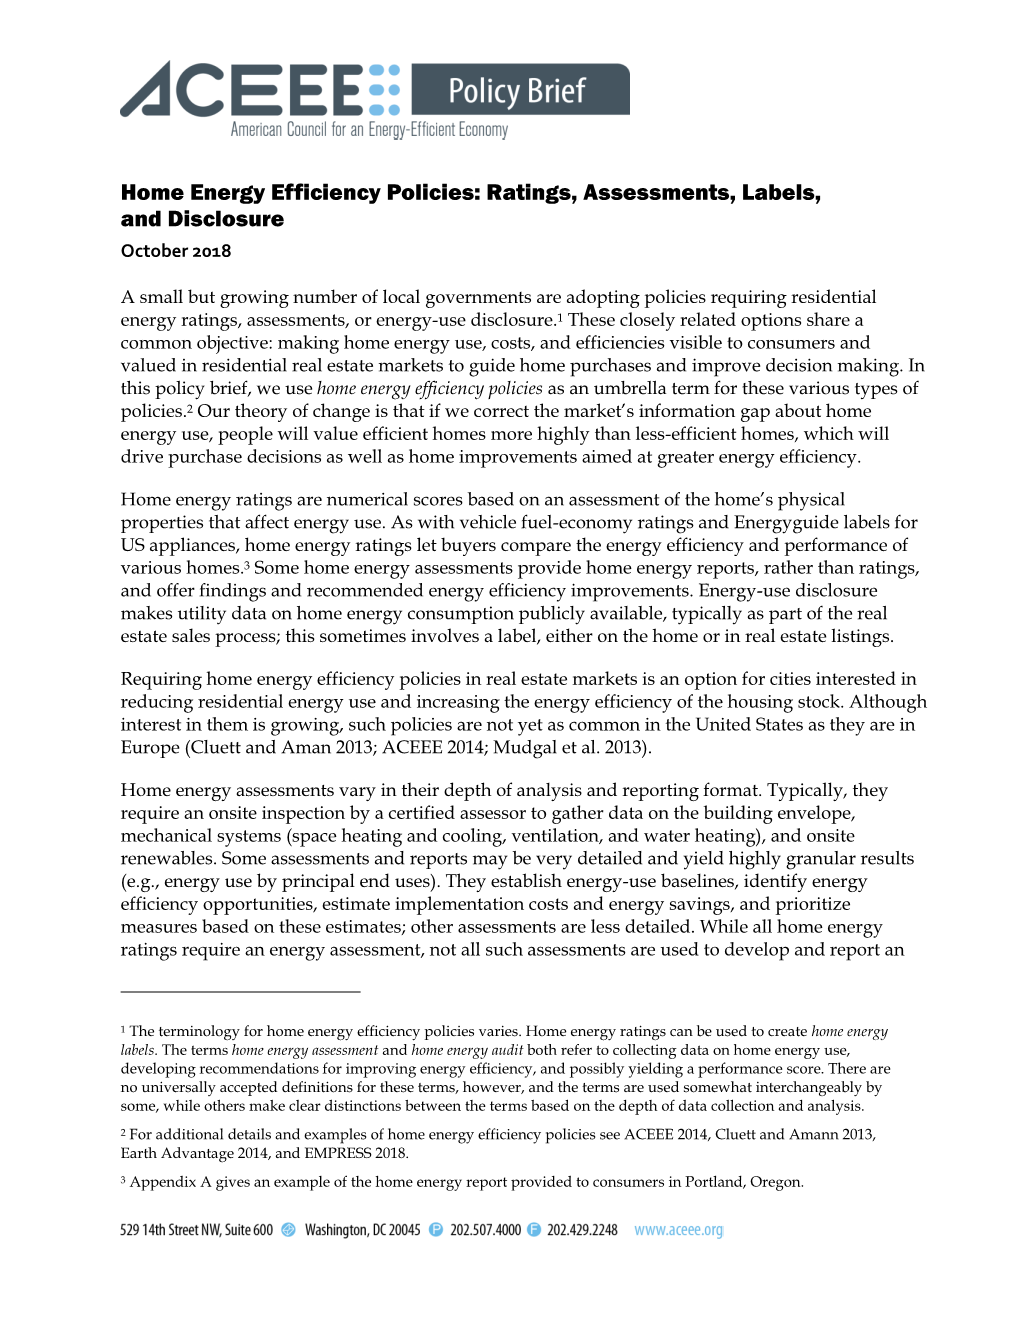 Home Energy Efficiency Policies: Ratings, Assessments, Labels, and Disclosure October 2018